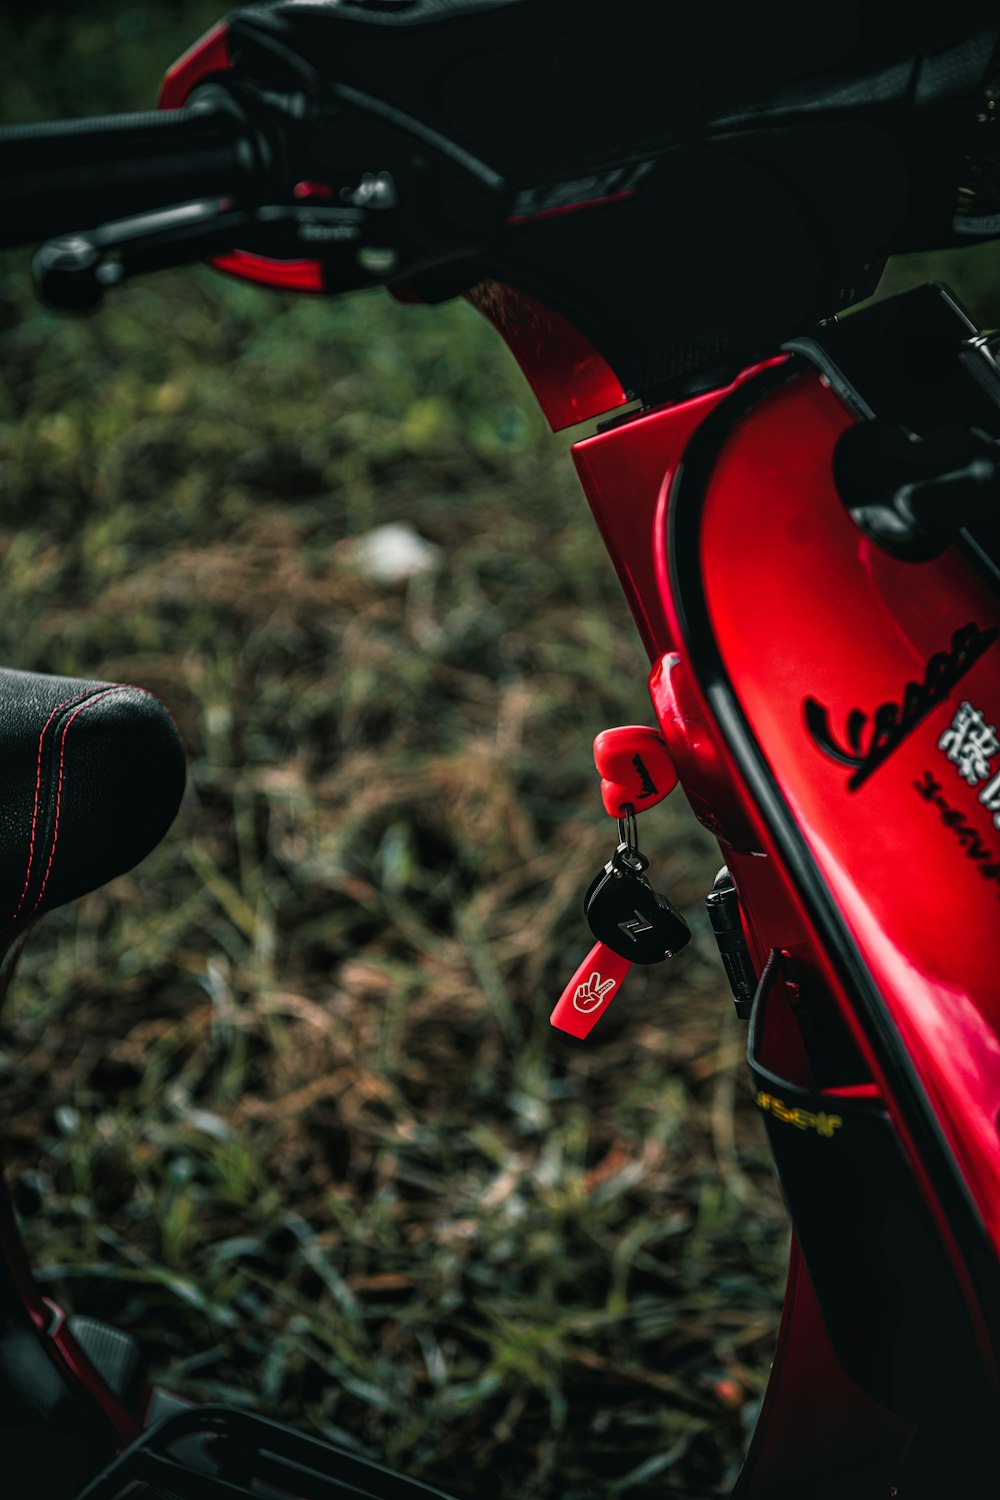 a close up of a red motorcycle parked in a field